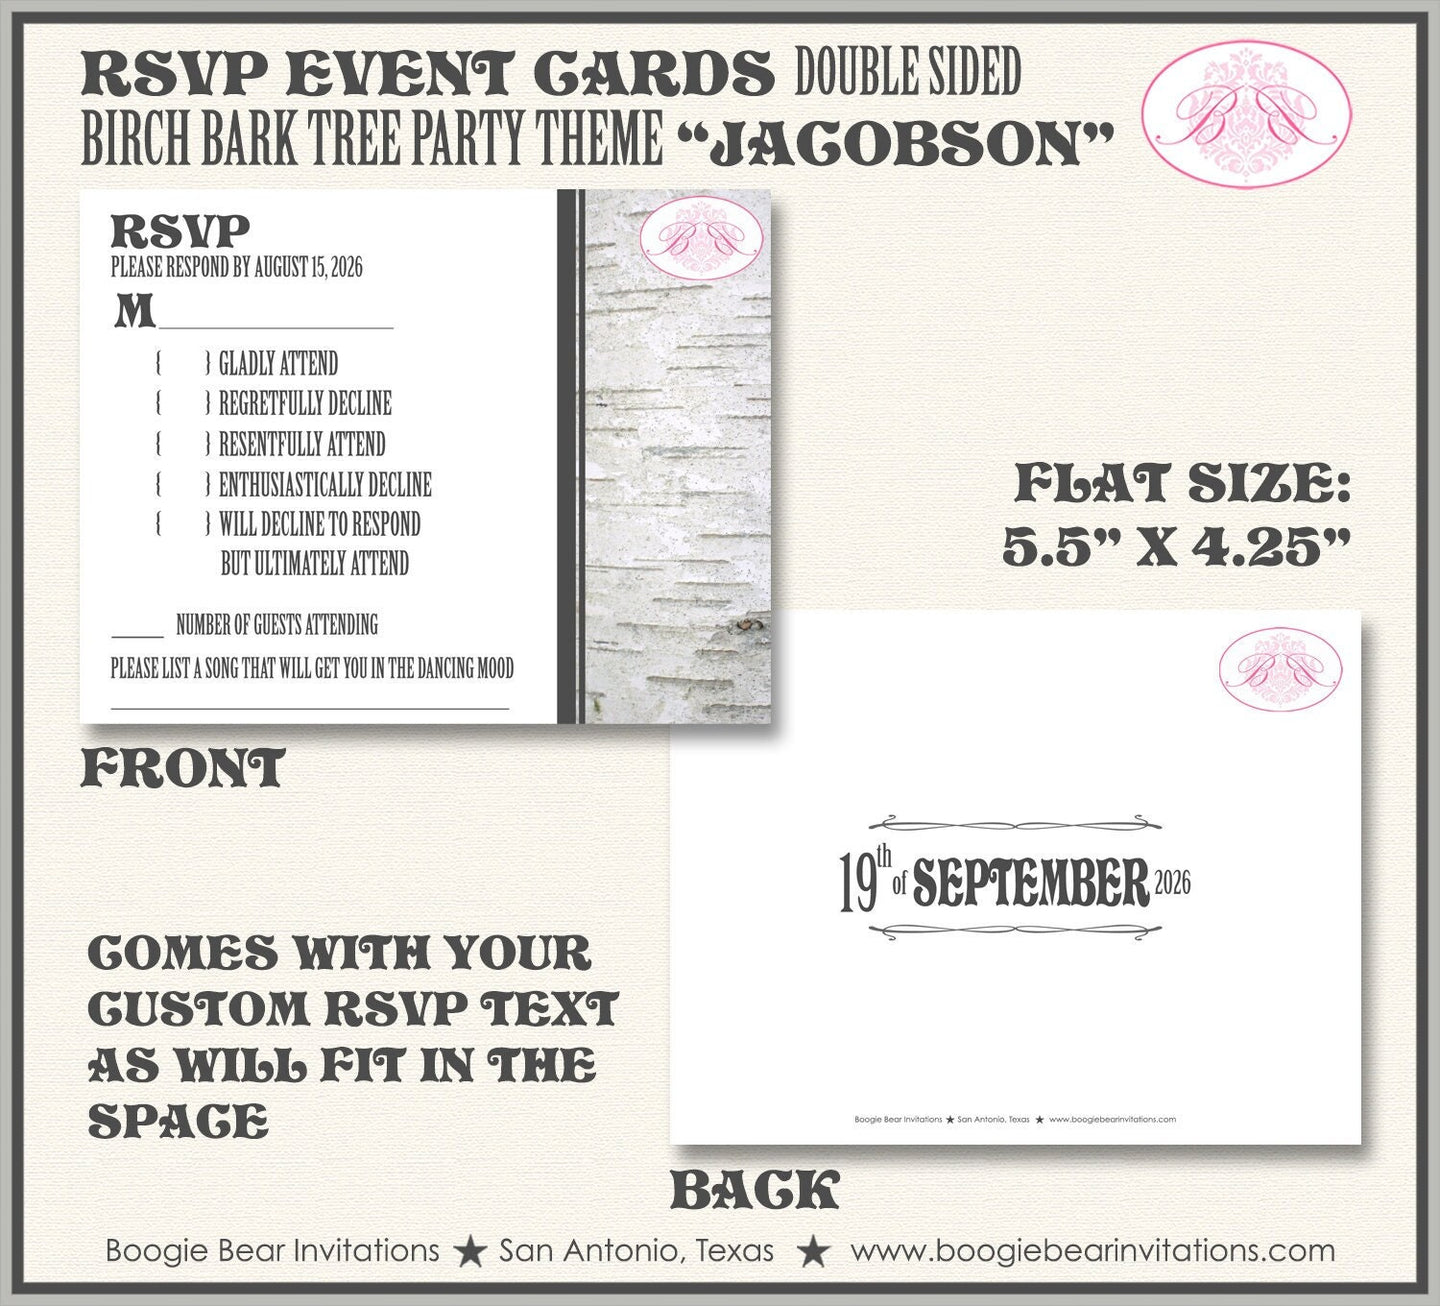 Birch Bark RSVP Card Birthday Party Response Reply Guest Woodland Tree Forest Outdoor Rustic Boogie Bear Invitations Jacobson Theme Printed